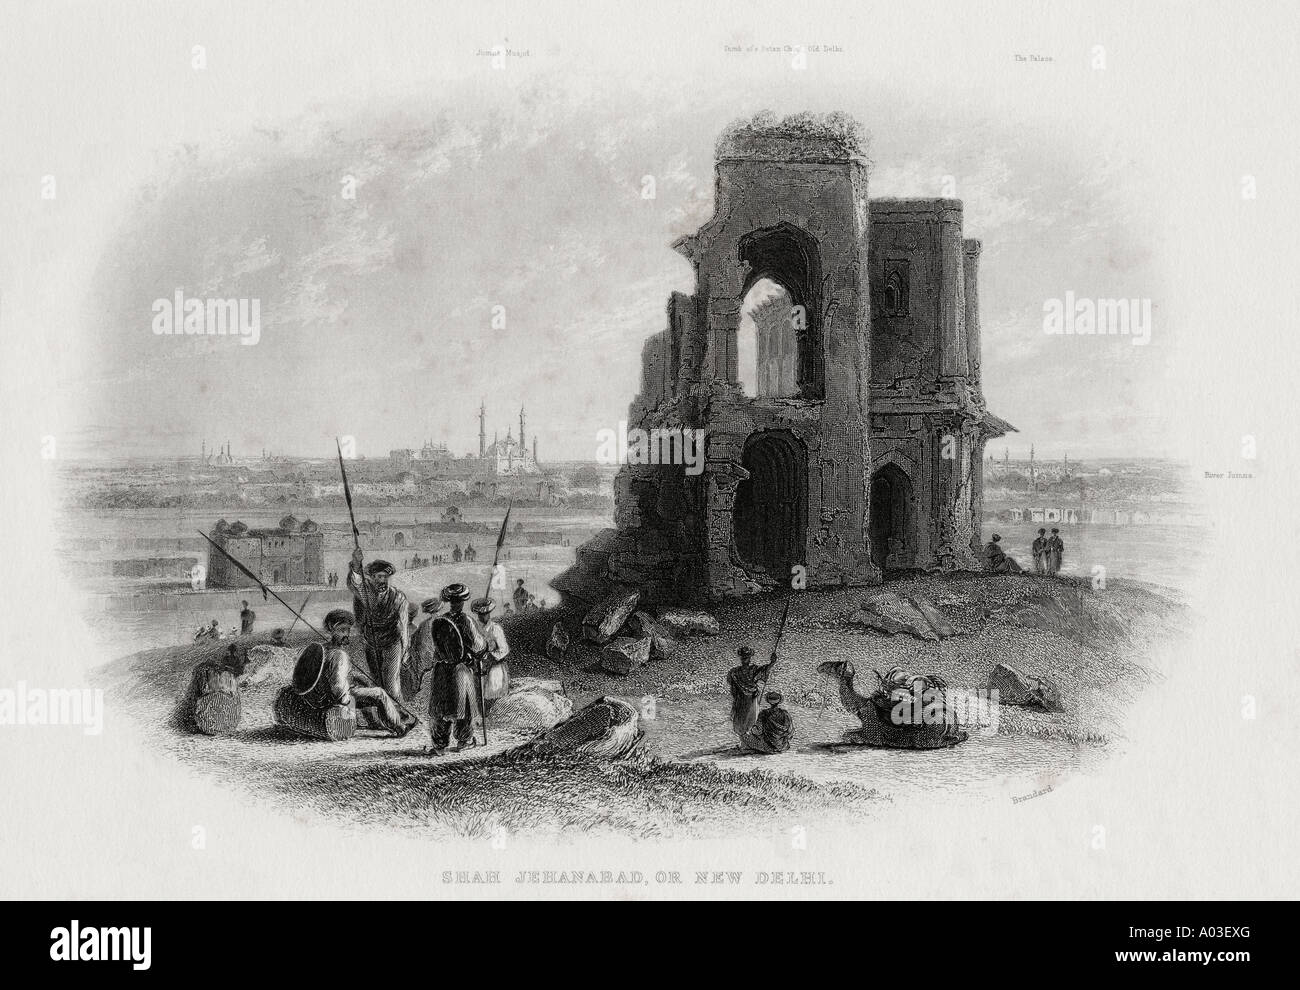 Shah Jehanabad or New Delhi, India. From a 19th century engraving by Brandard Stock Photo